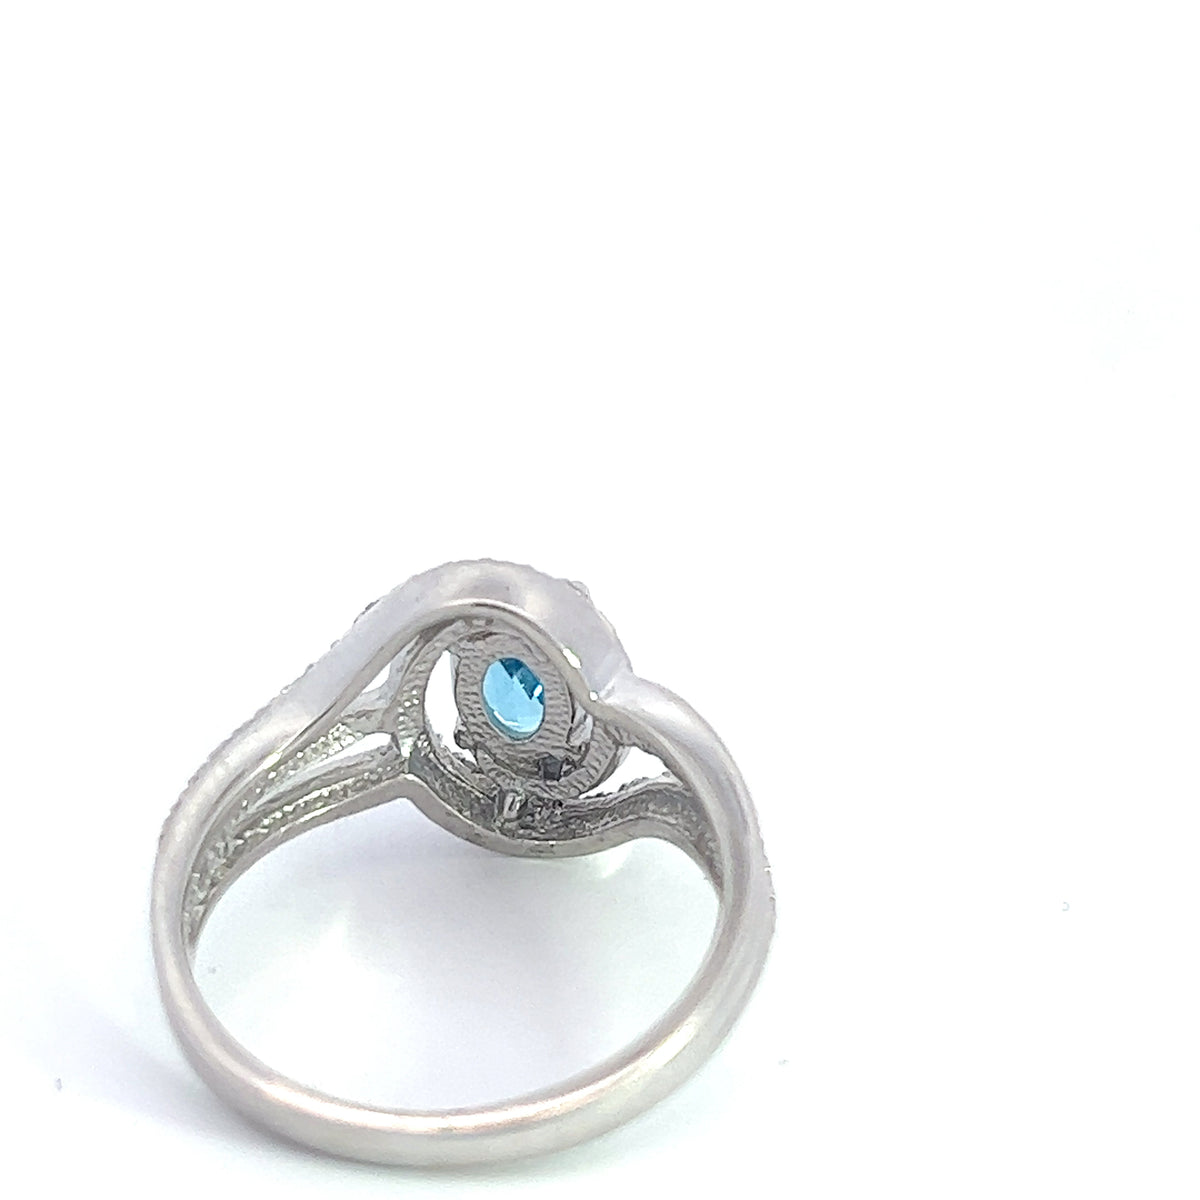 925 Sterling Silver 7 x 5mm Blue Topaz and 0.03cttw Diamond Ring - Size 6